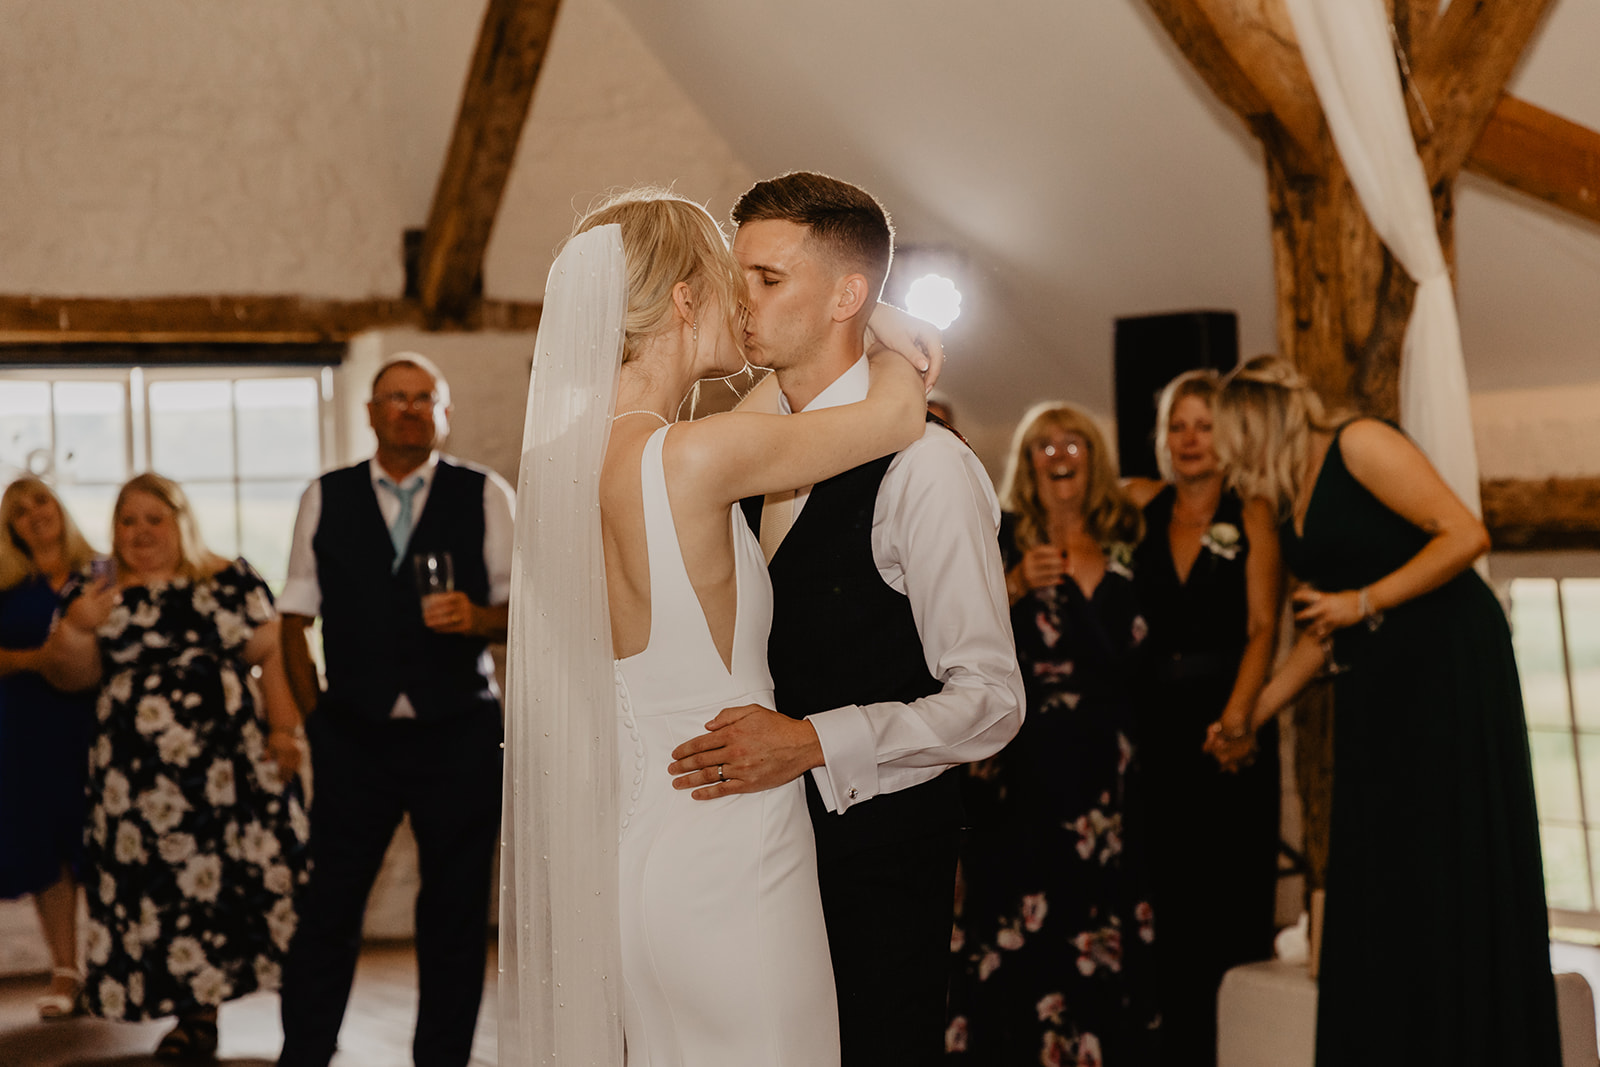 Bride and Groom first dance at a Bury Manor Barn Wedding in Sussex. Photographer OliveJoy Photography.